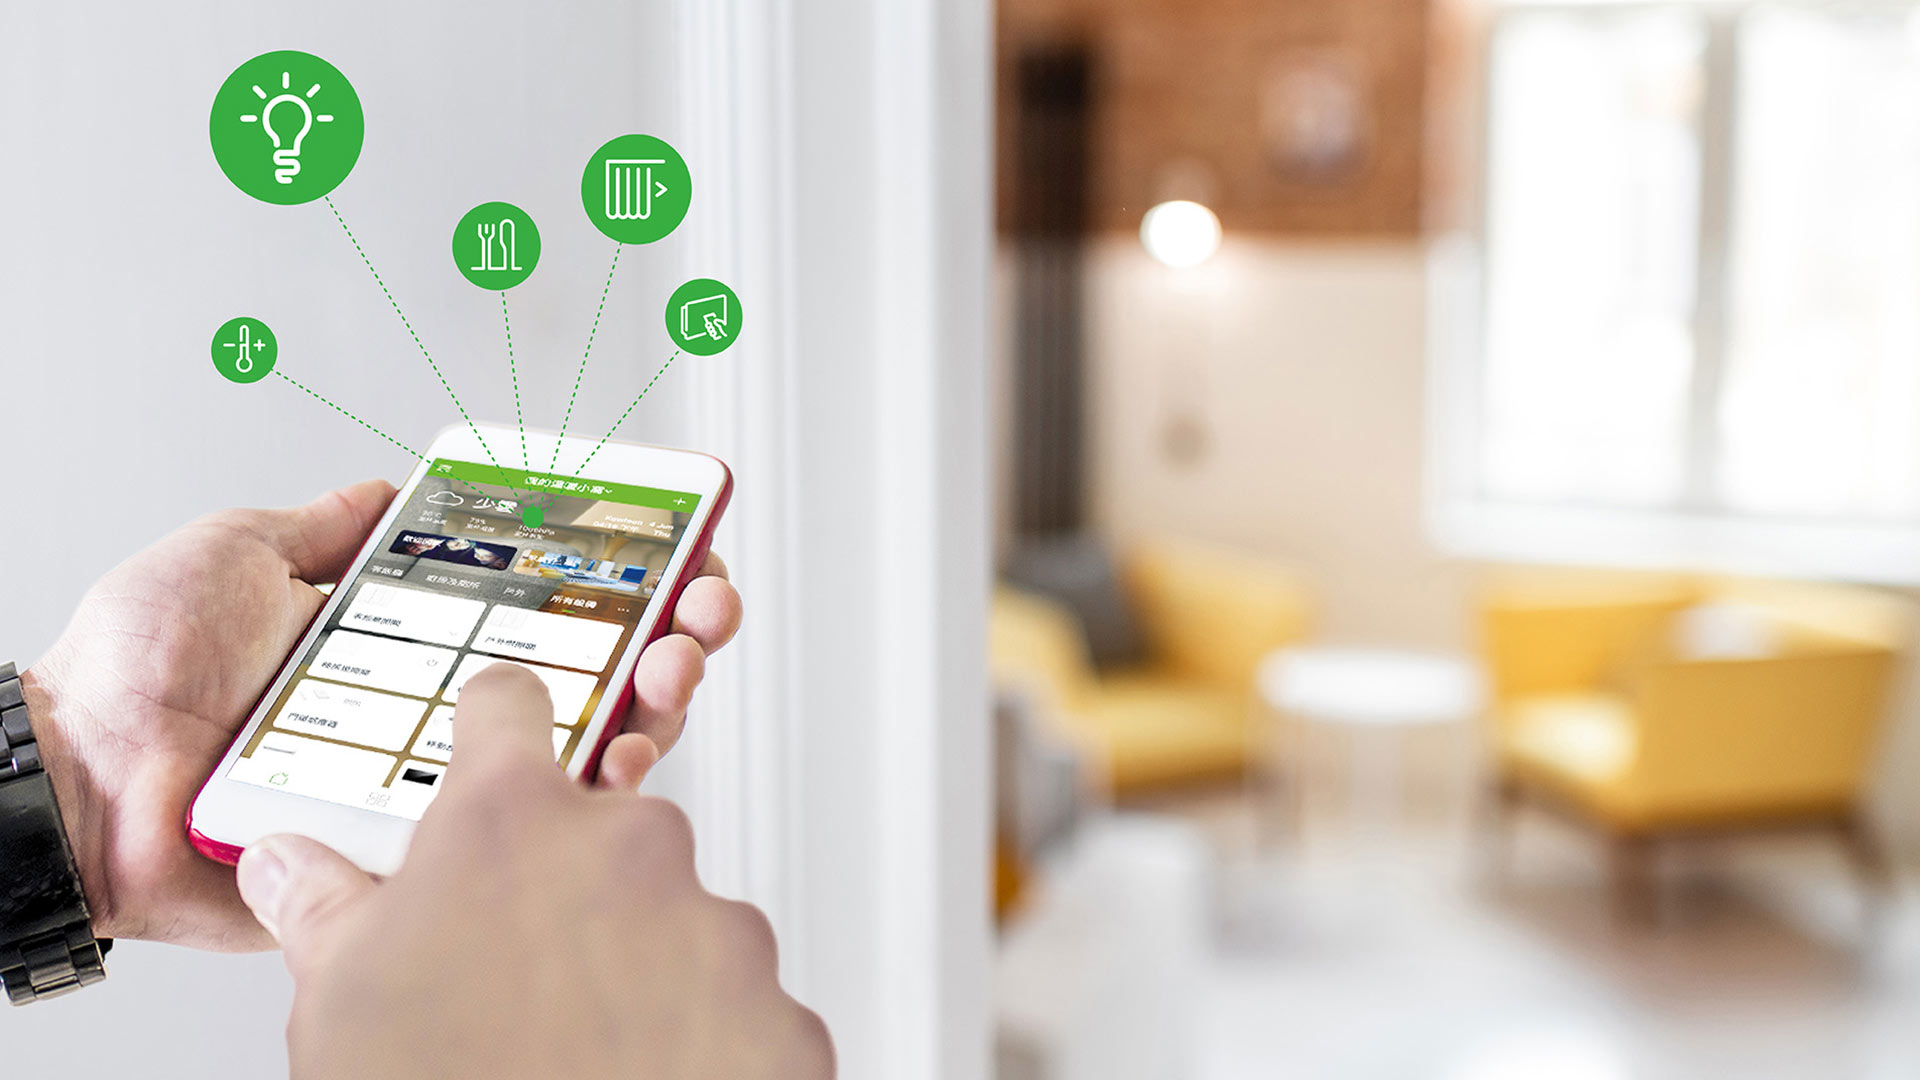 Wiser Smart Home Automation Experience Center | Schneider Electric India